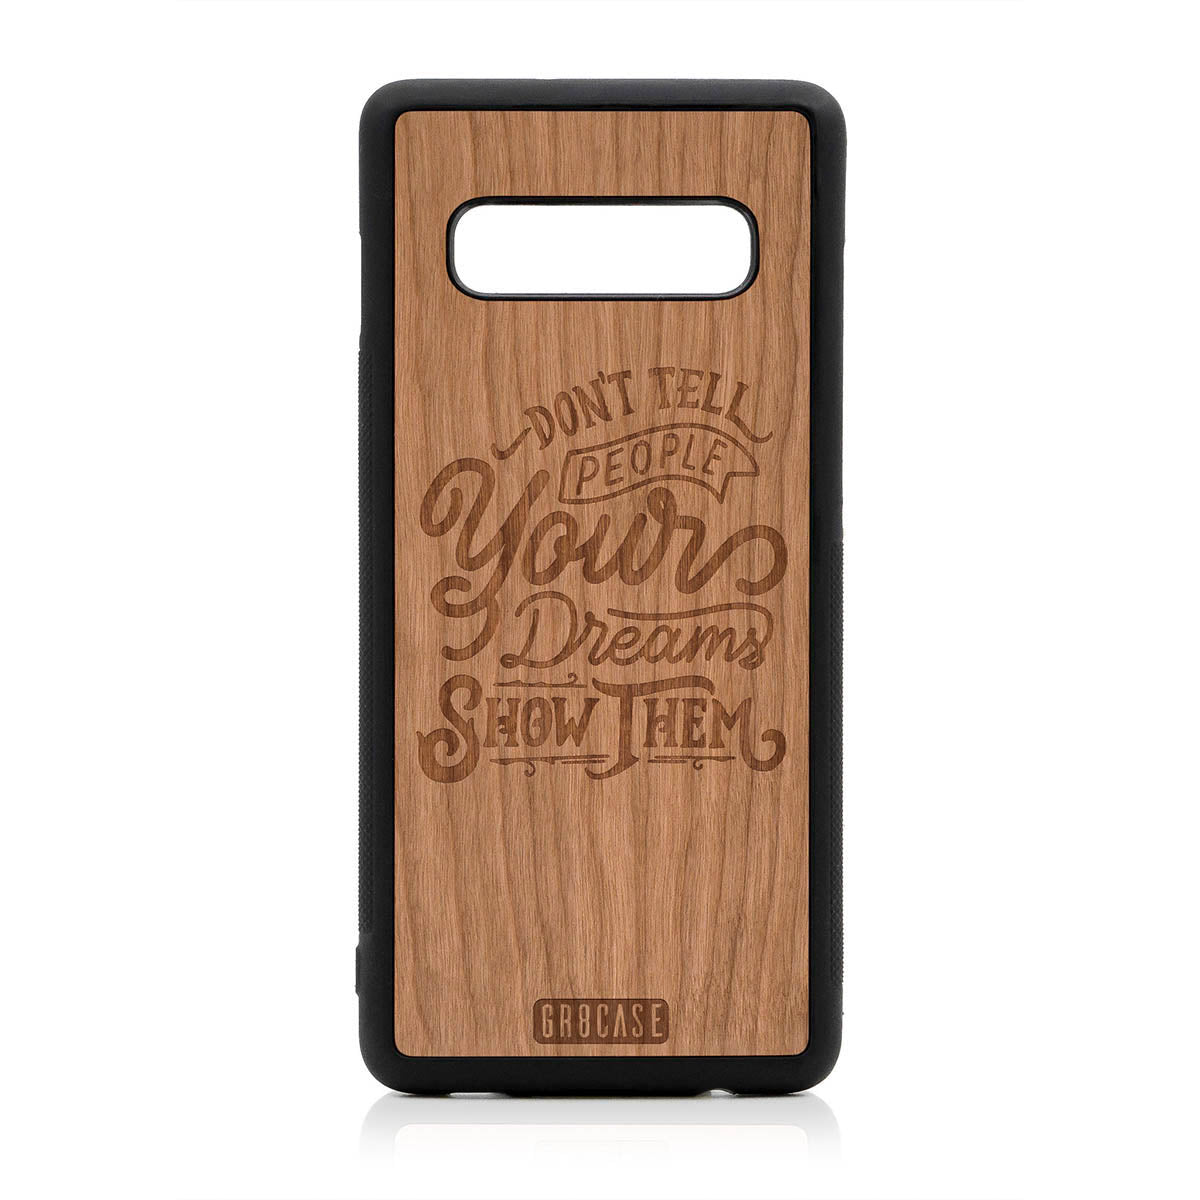 Don't Tell People Your Dreams Show Them Design Wood Case For Samsung Galaxy S10 Plus by GR8CASE